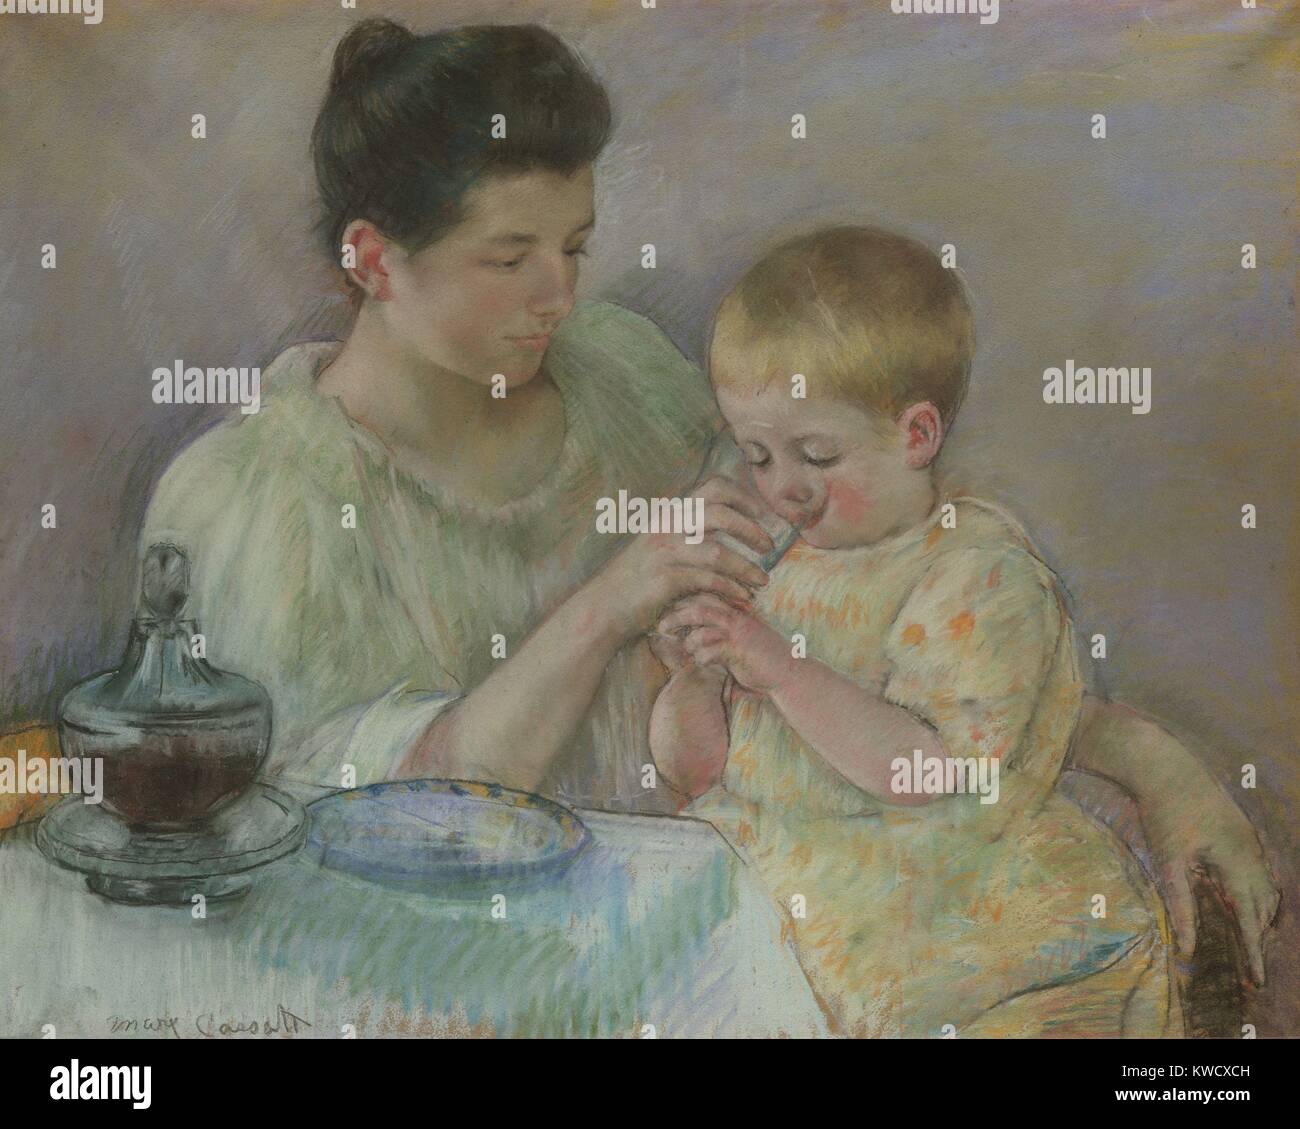 Mother Feeding Child, by Mary Cassatt, 1898, Impressionist pastel painting, on paper. This is an unsentimental depiction of daily life (BSLOC 2017 3 136) Stock Photo